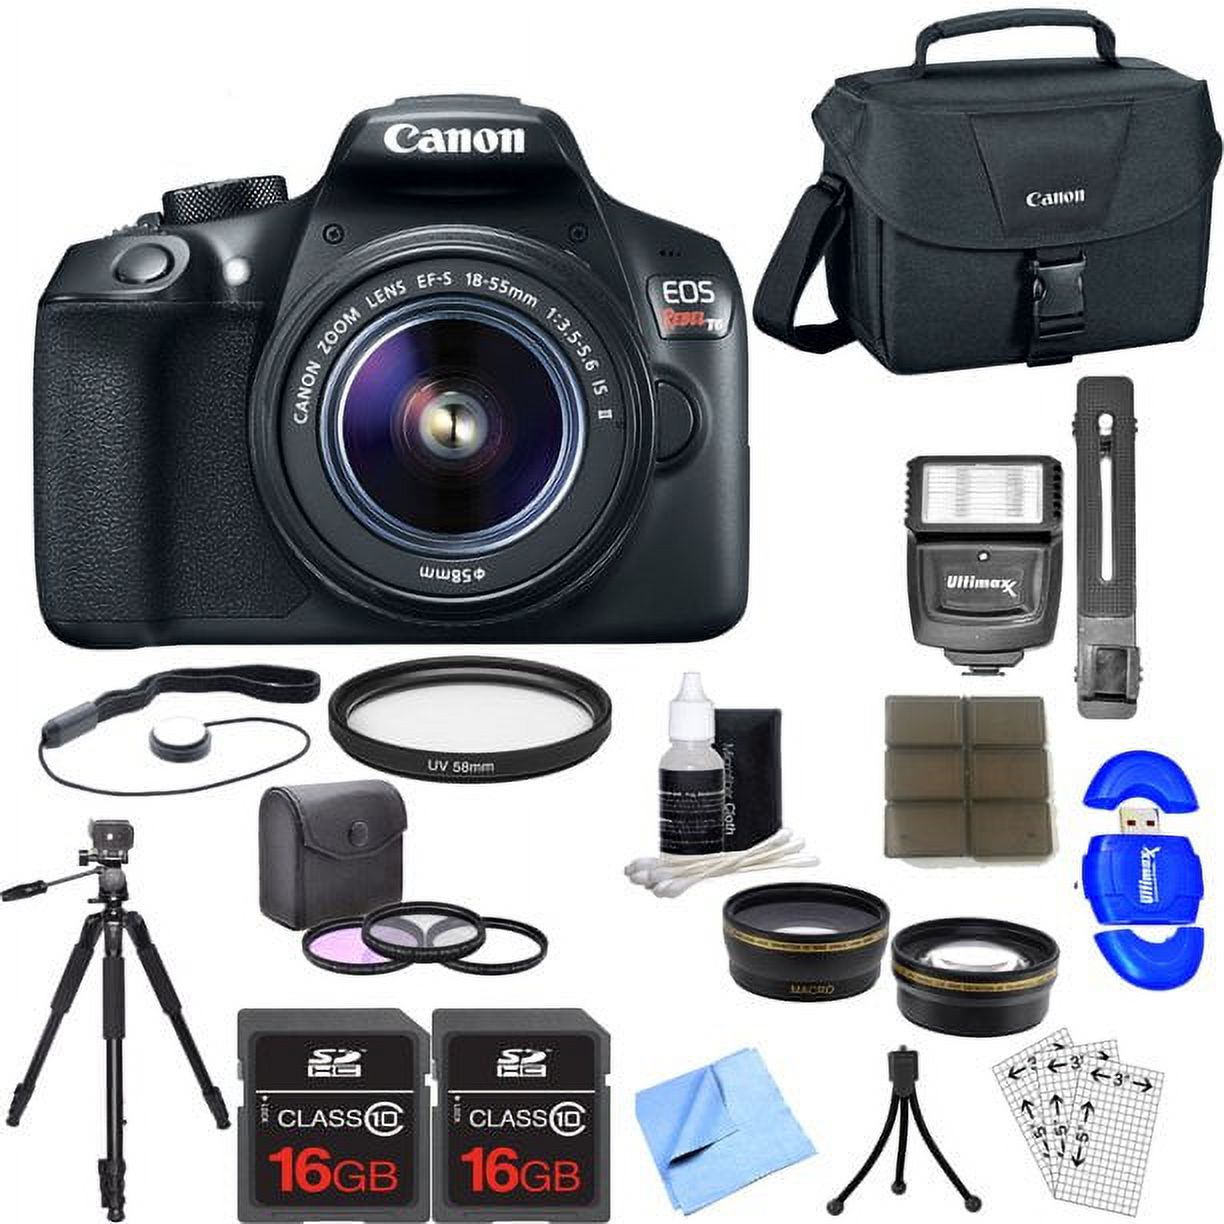 Canon EOS Rebel T6/2000D DSLR Camera with 18-55mm Lens | DSLR Bag, Filter Kit, Memory Cards, Tripod, Flash, Cleaning Kit and More - image 1 of 5